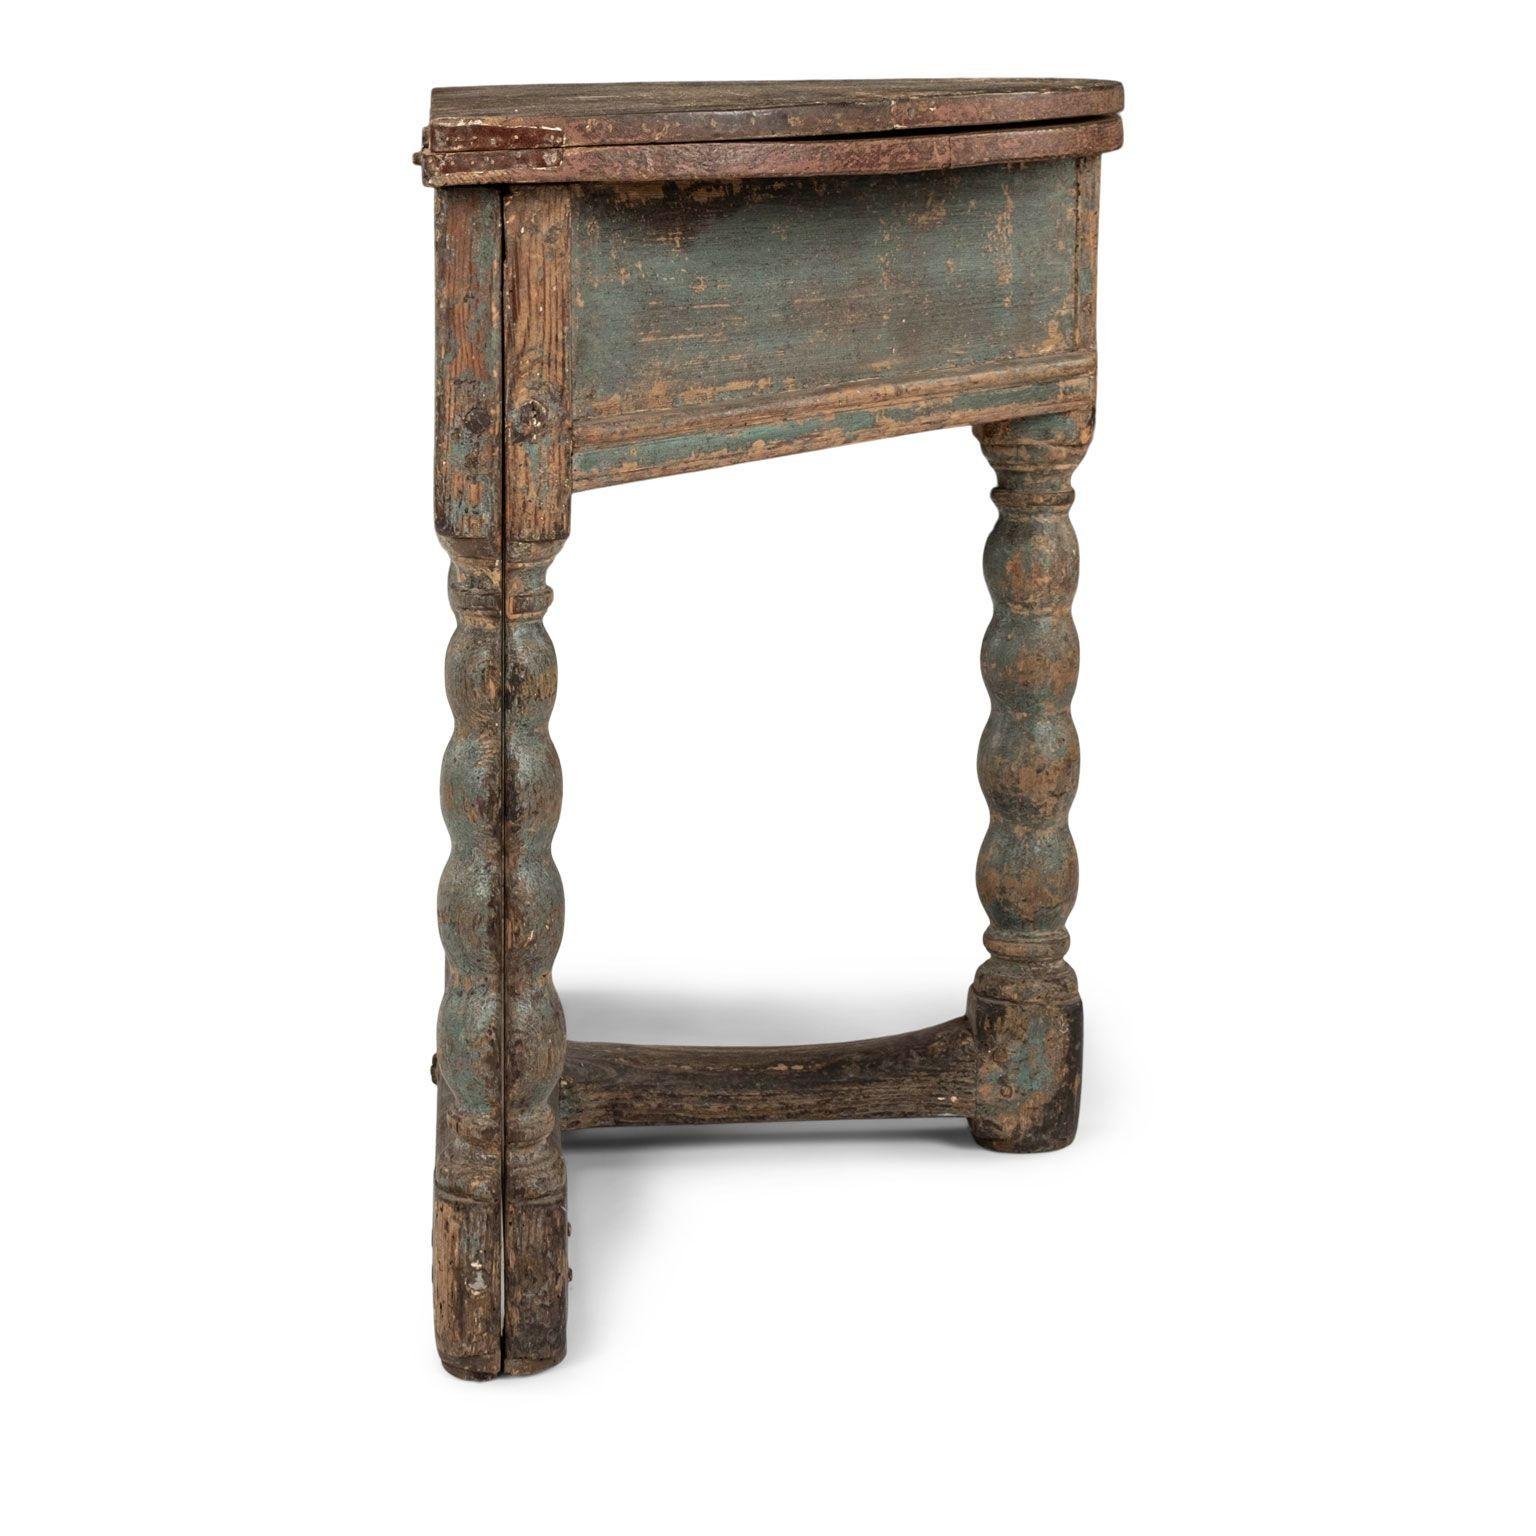 Painted baroque Swedish demilune fold-over table, dating to the late 17th century. Softwood table constructed circa 1670-1699 in Halland, Sweden, with scrubbed demilune top that flips into a full circle. Raised upon a carved bobbin base in original